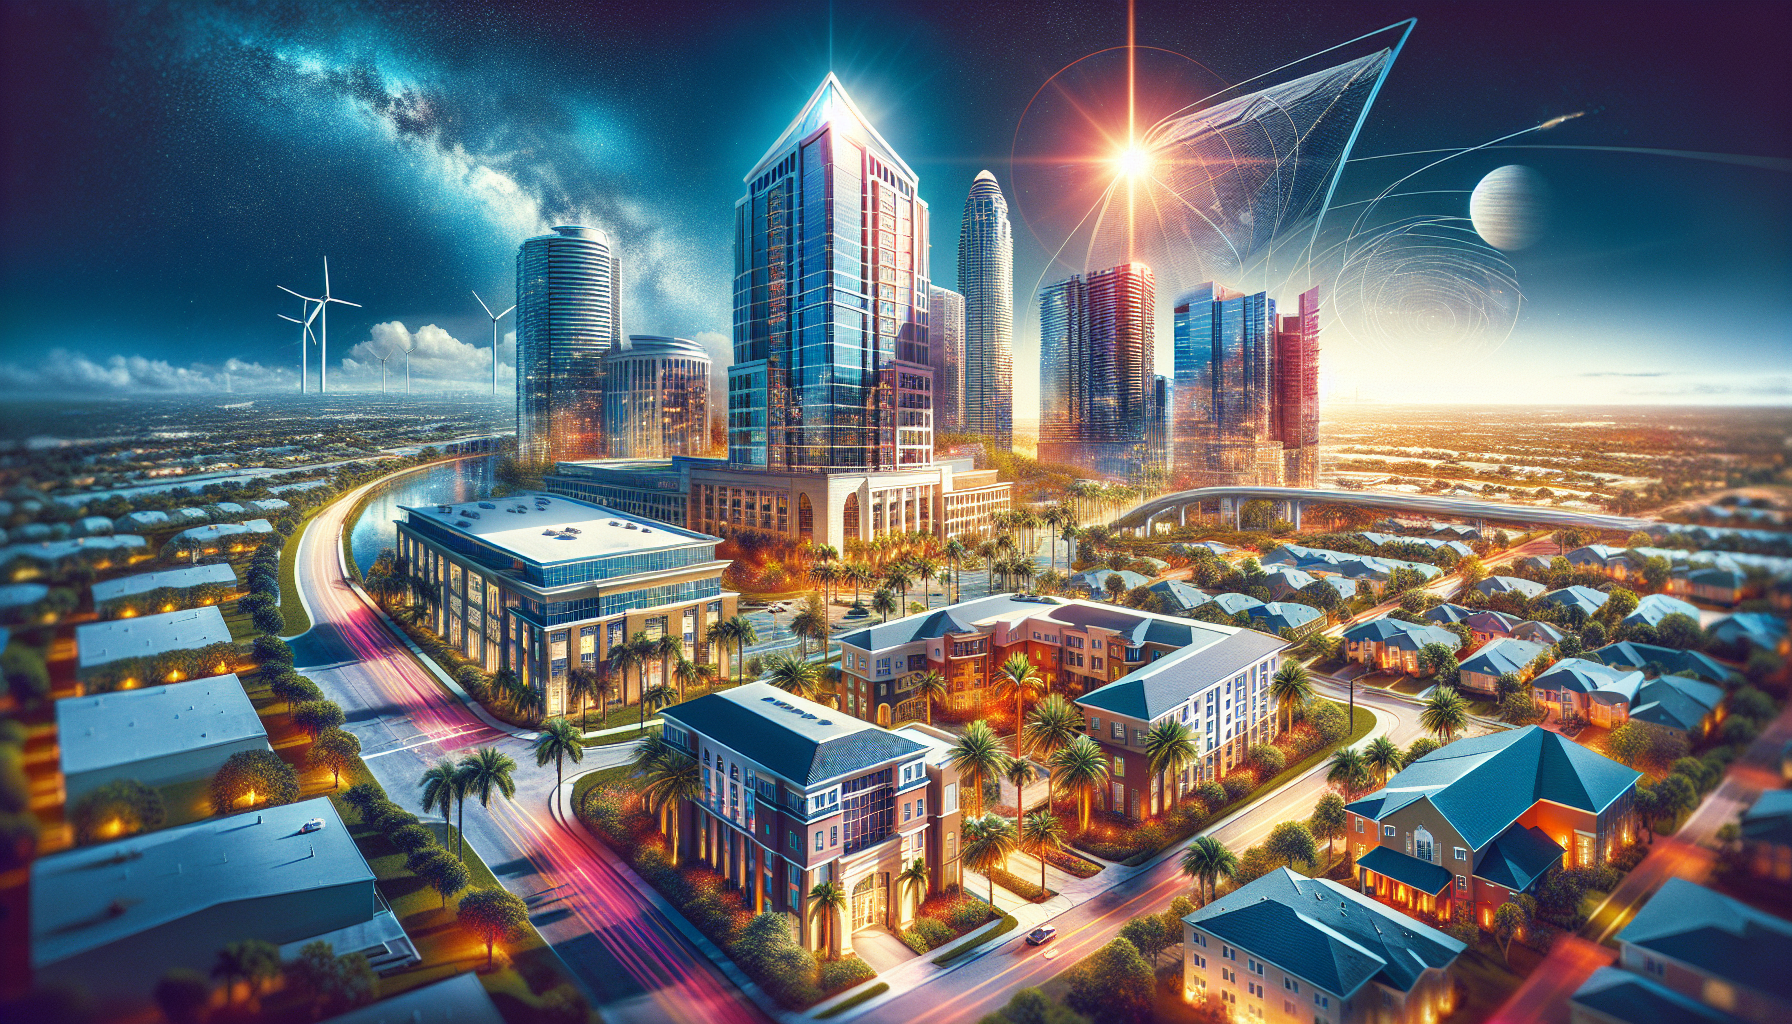 Diverse properties managed by Florida REITs